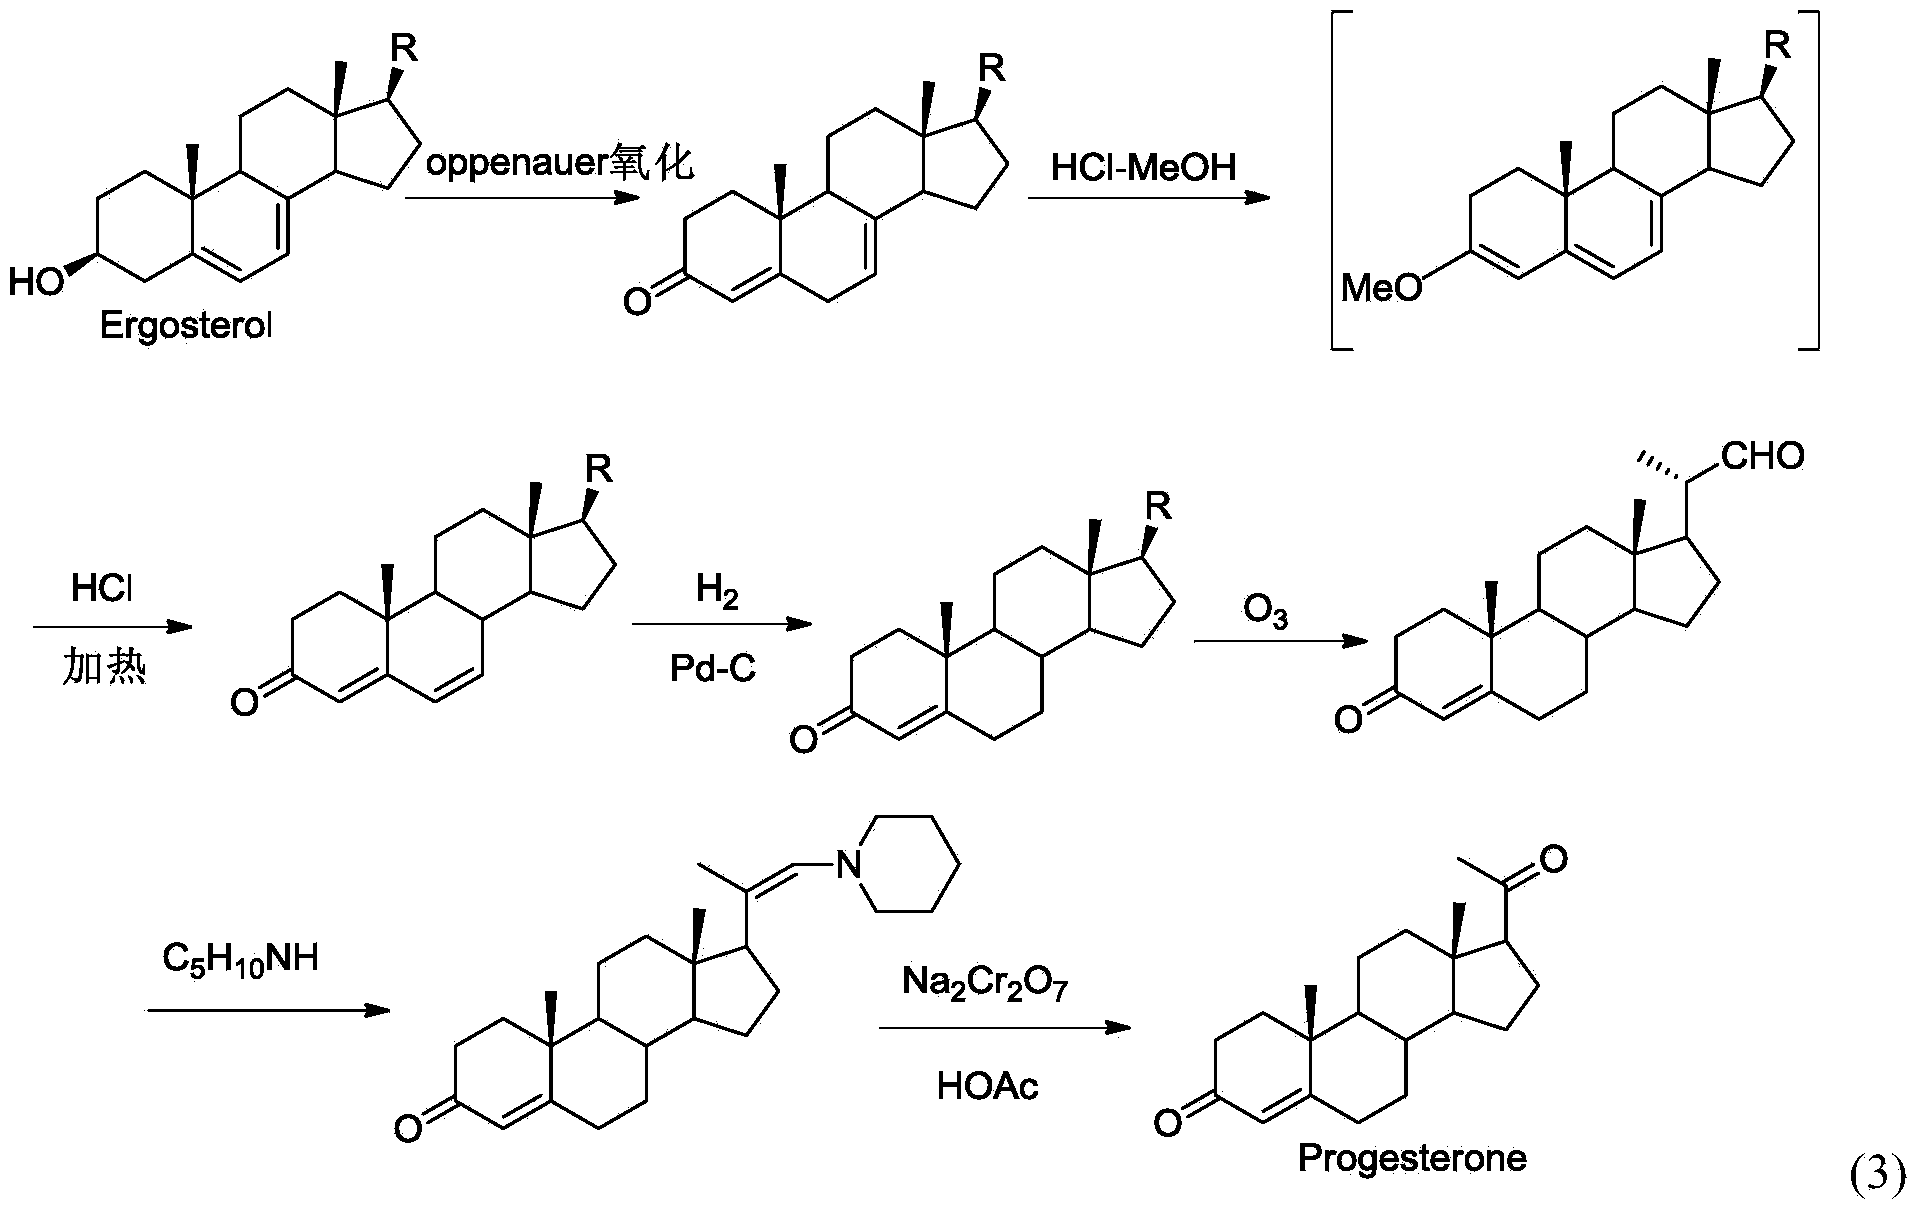 New technique for synthesizing progesterone